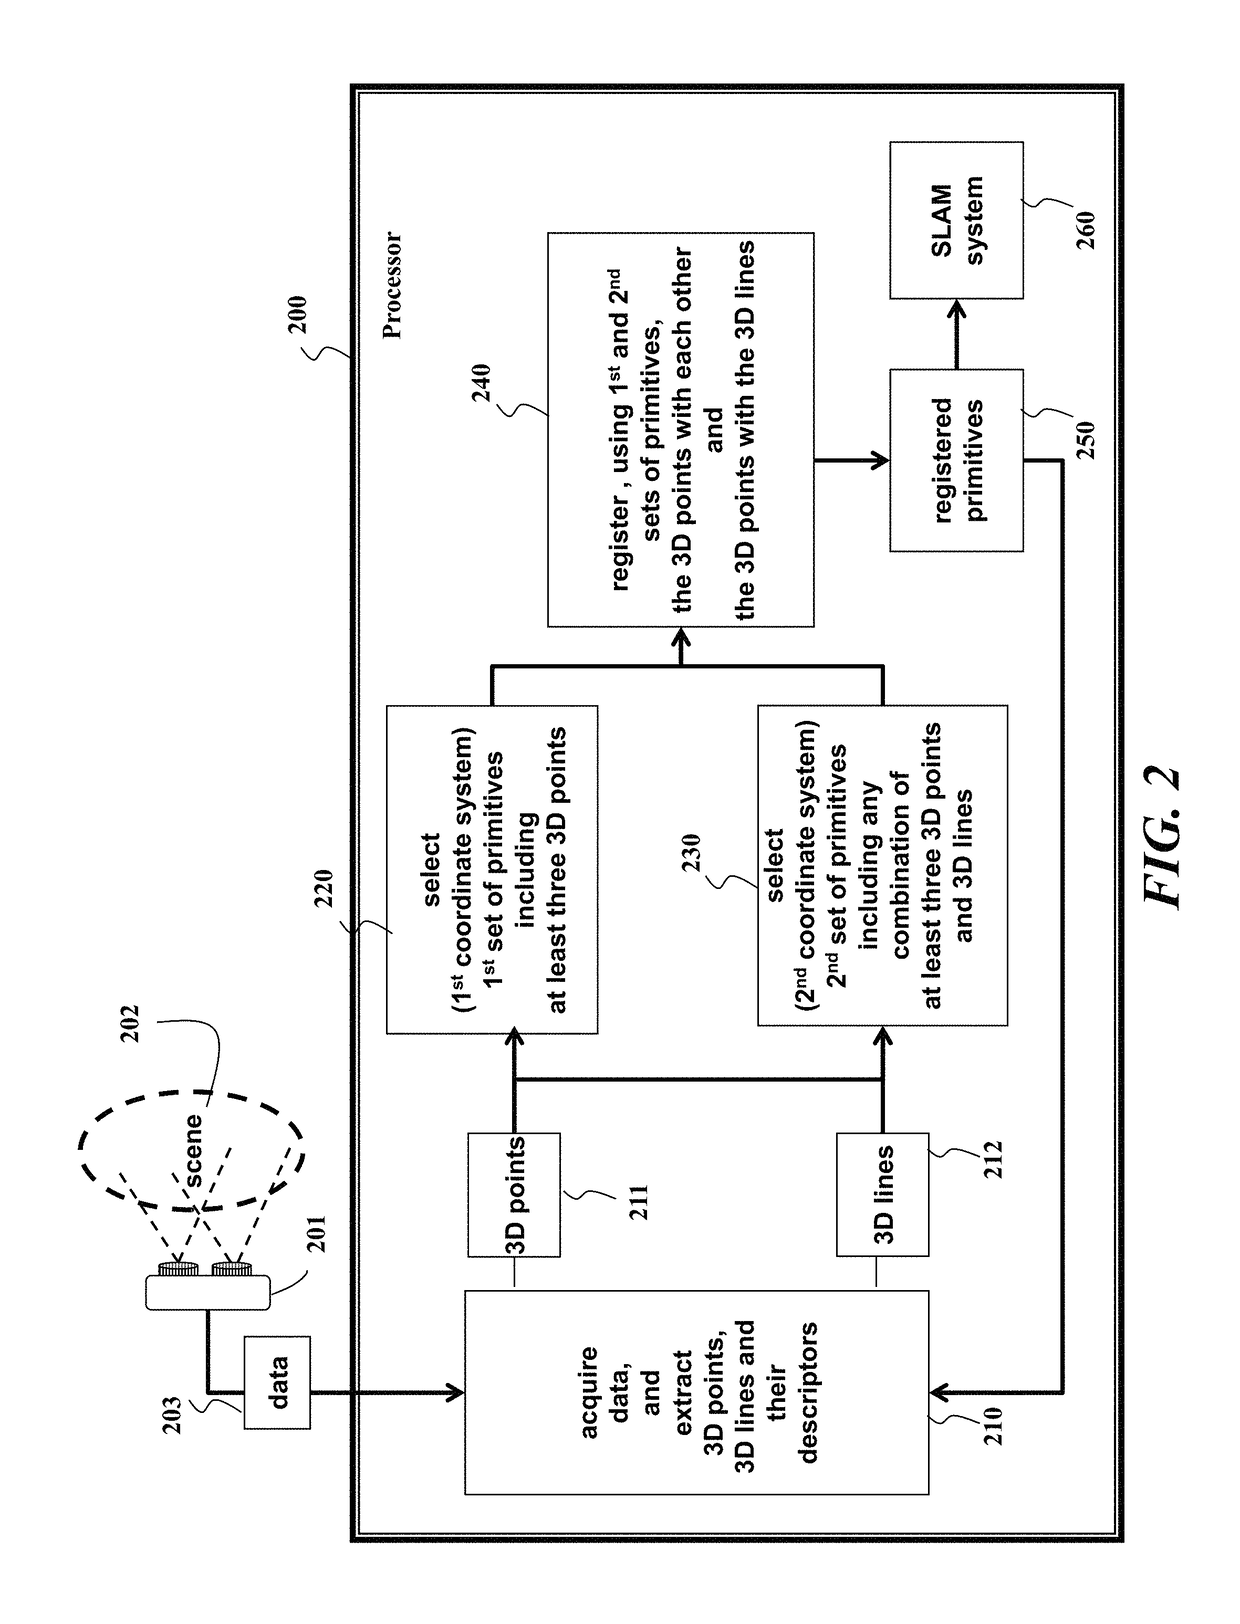 System and method for hybrid simultaneous localization and mapping of 2D and 3D data acquired by sensors from a 3D scene